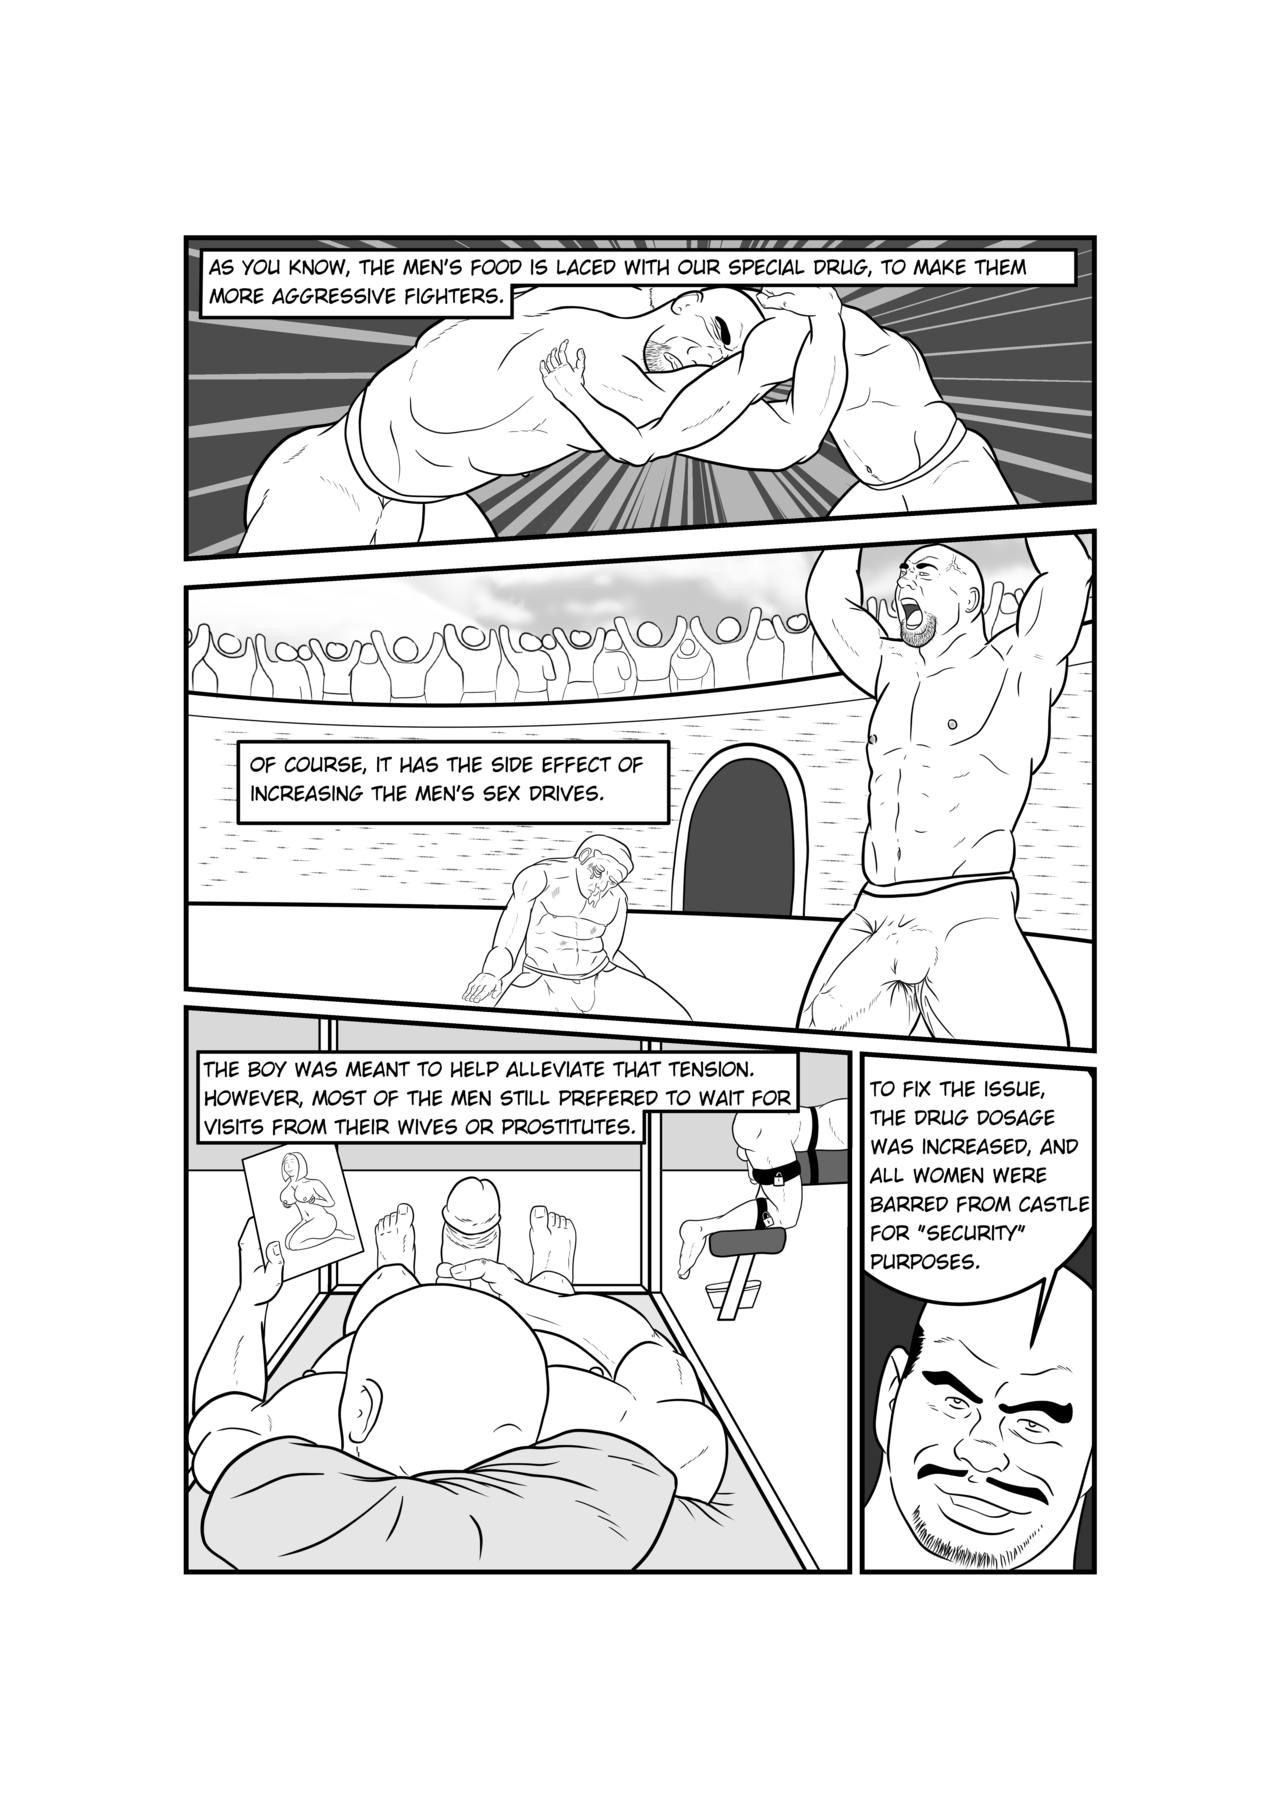 Trans Father and Son in Hell - Unauthorized Fan Comic - Original Juicy - Page 3